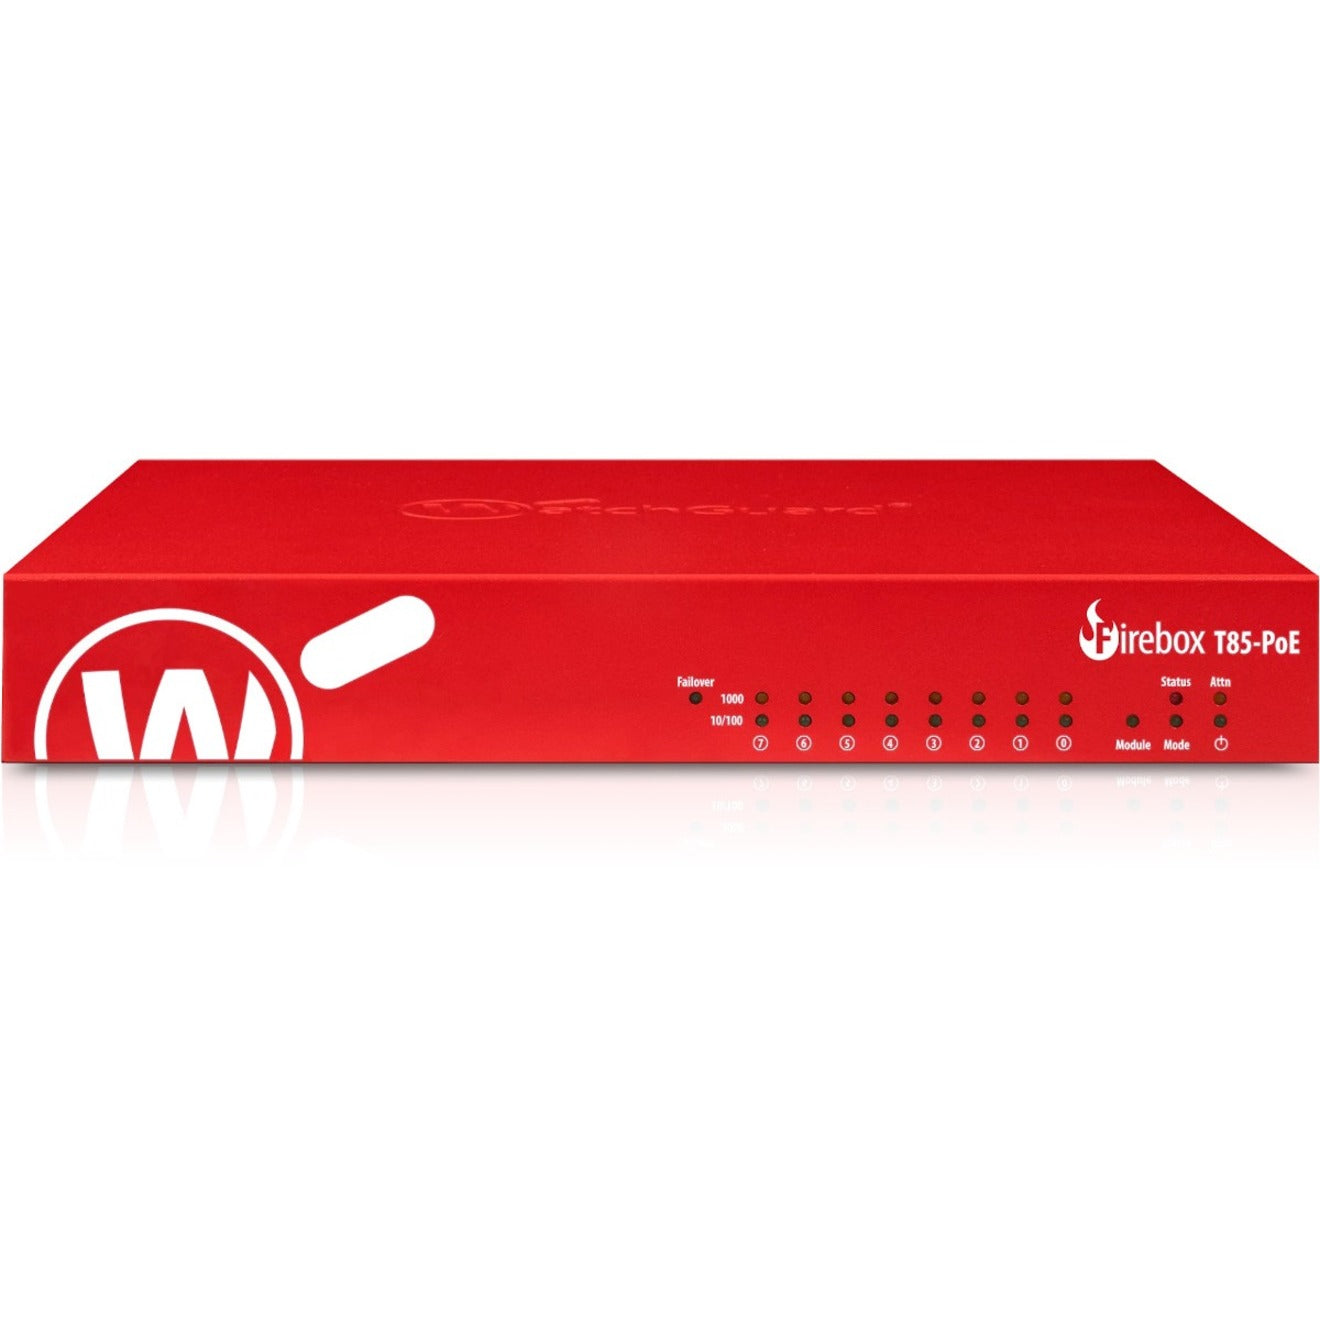 WatchGuard WGT85415-US Firebox T85-PoE Network Security/Firewall Appliance, 8 Ports, 5 Year Basic Security Suite